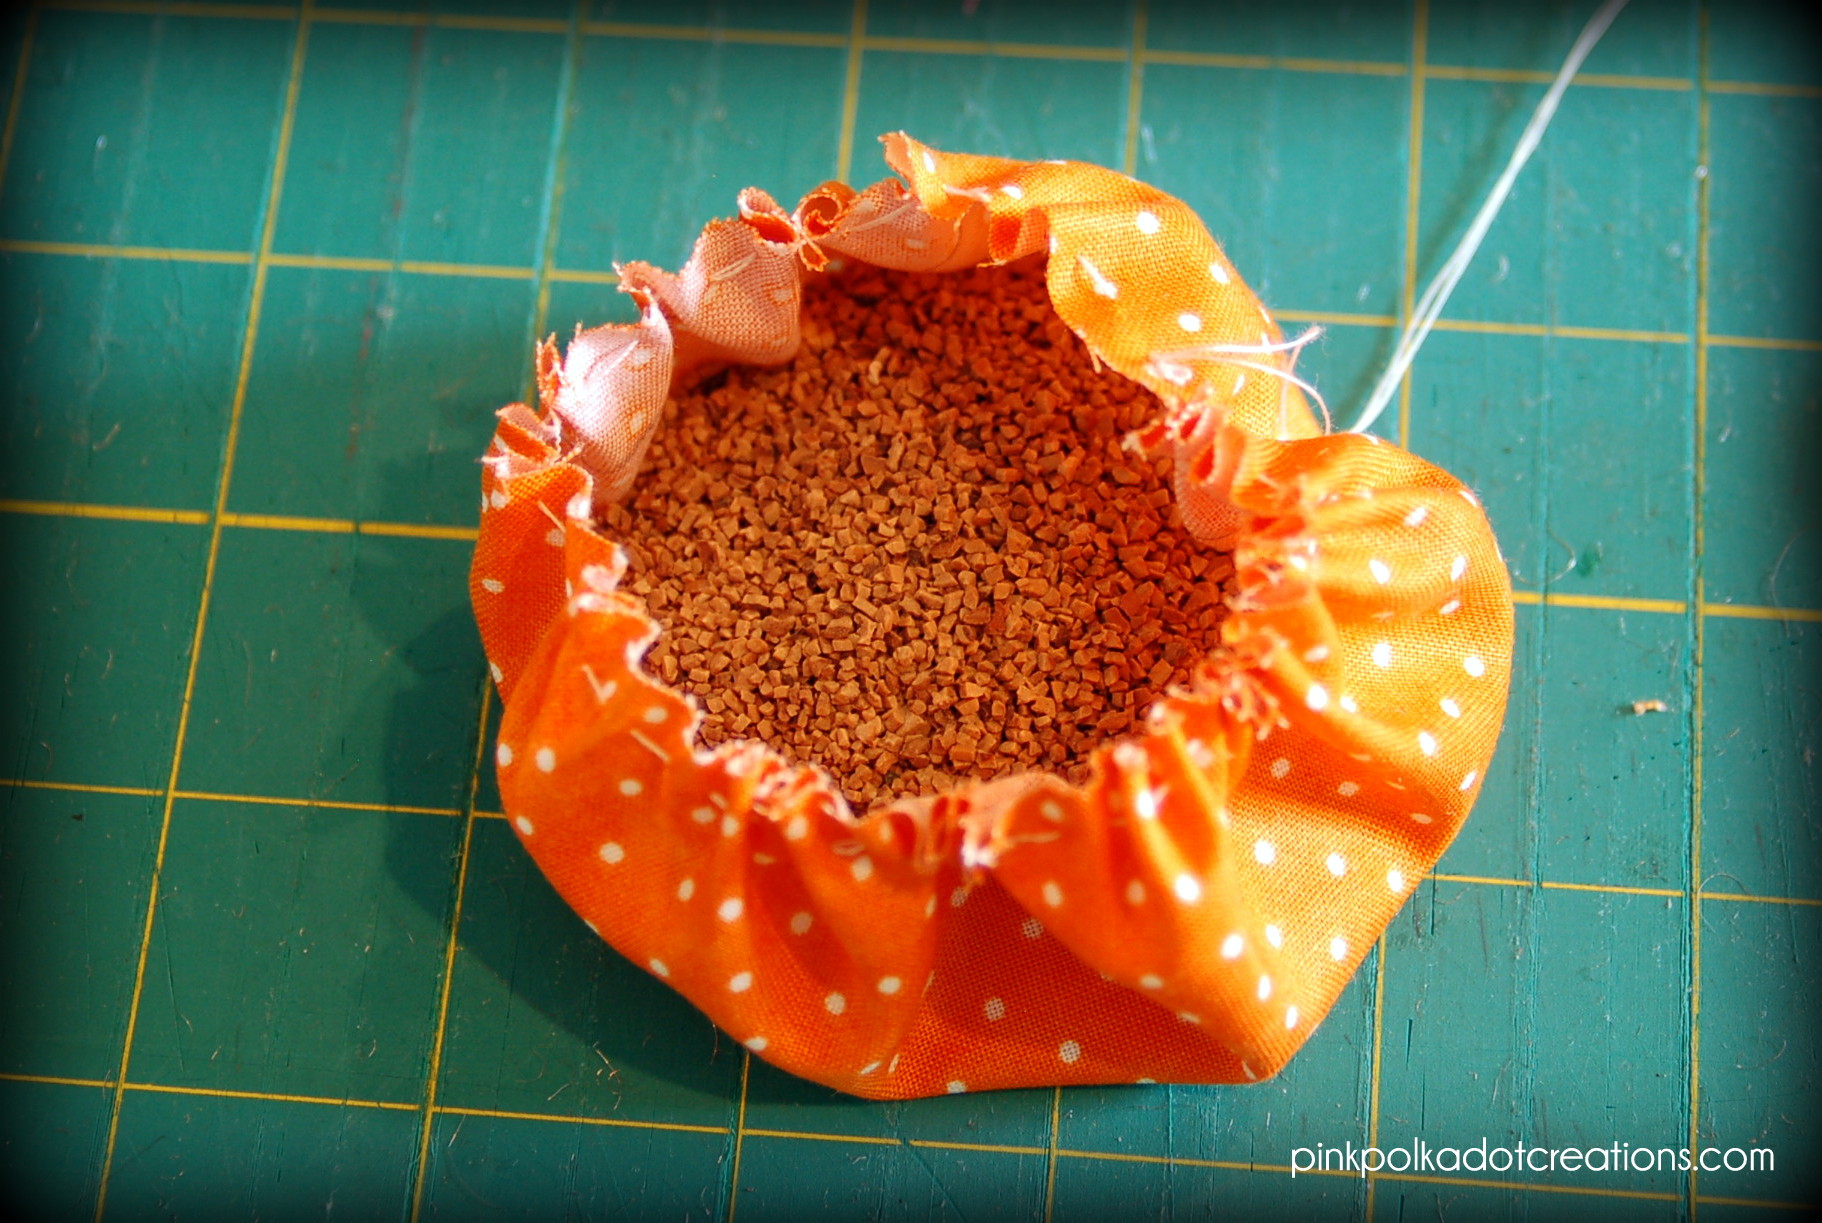 Pin Cushions - Crushed Walnut Shells sewing discussion topic